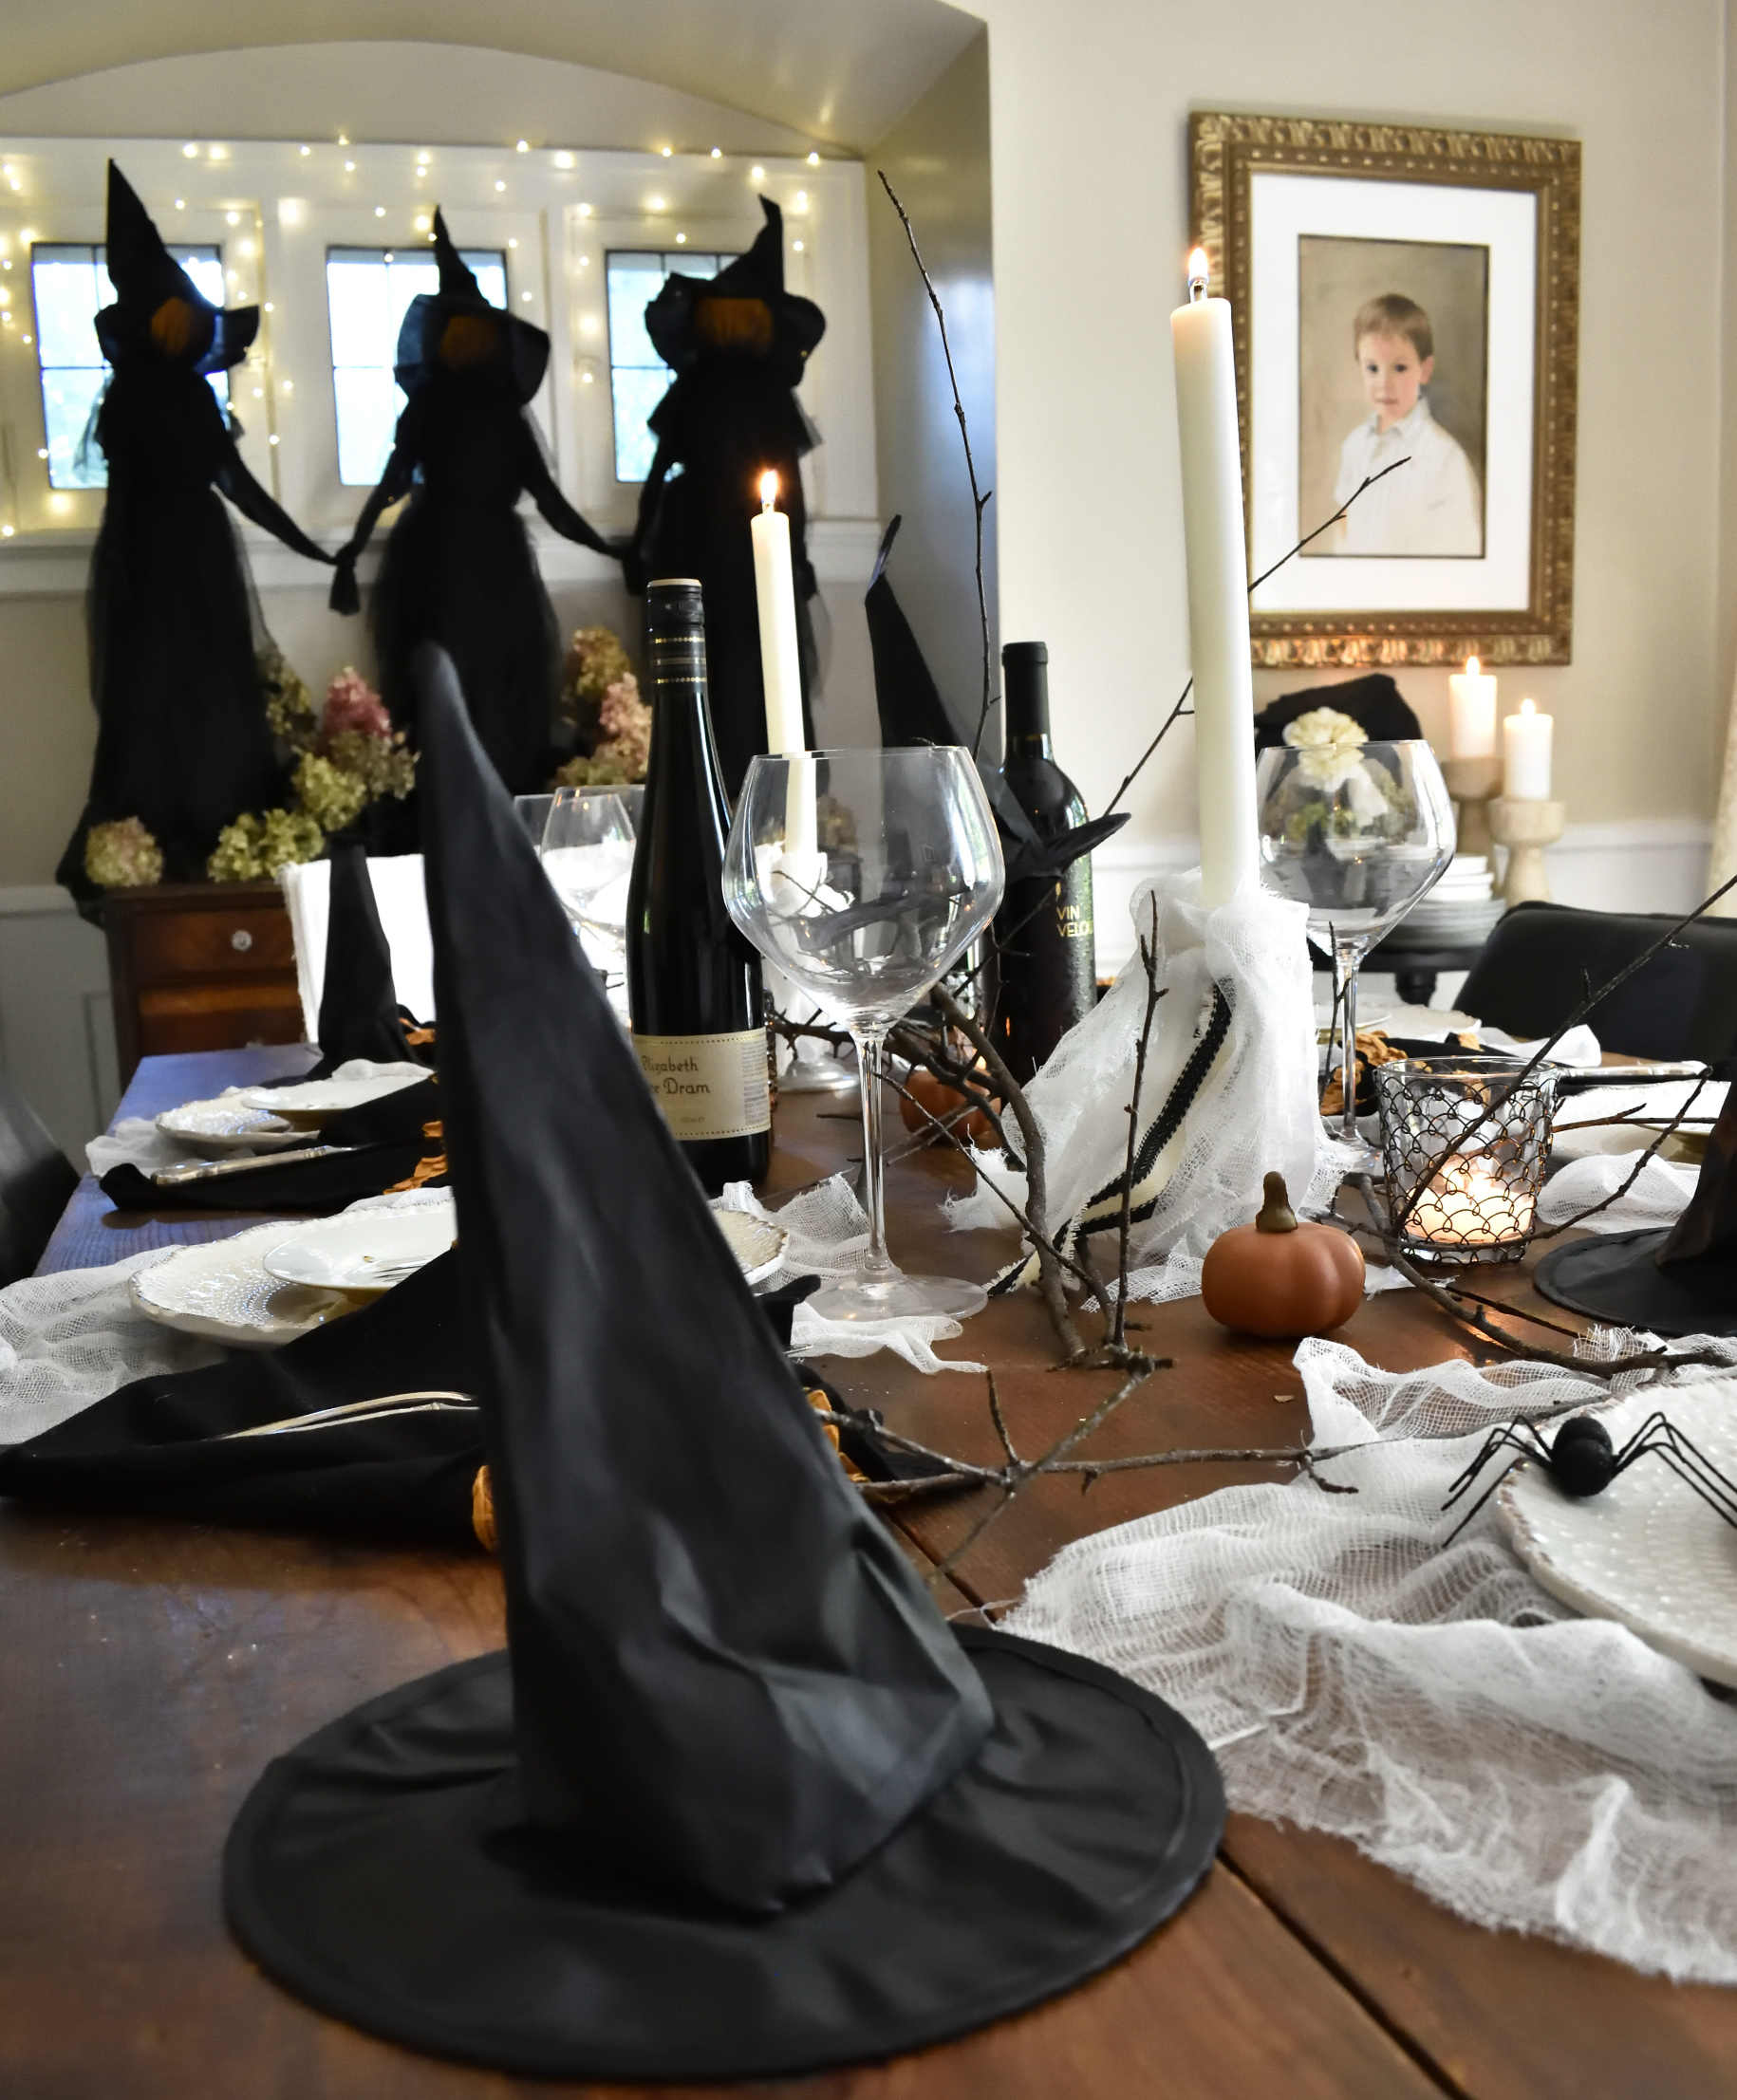 a bewitching dinner party